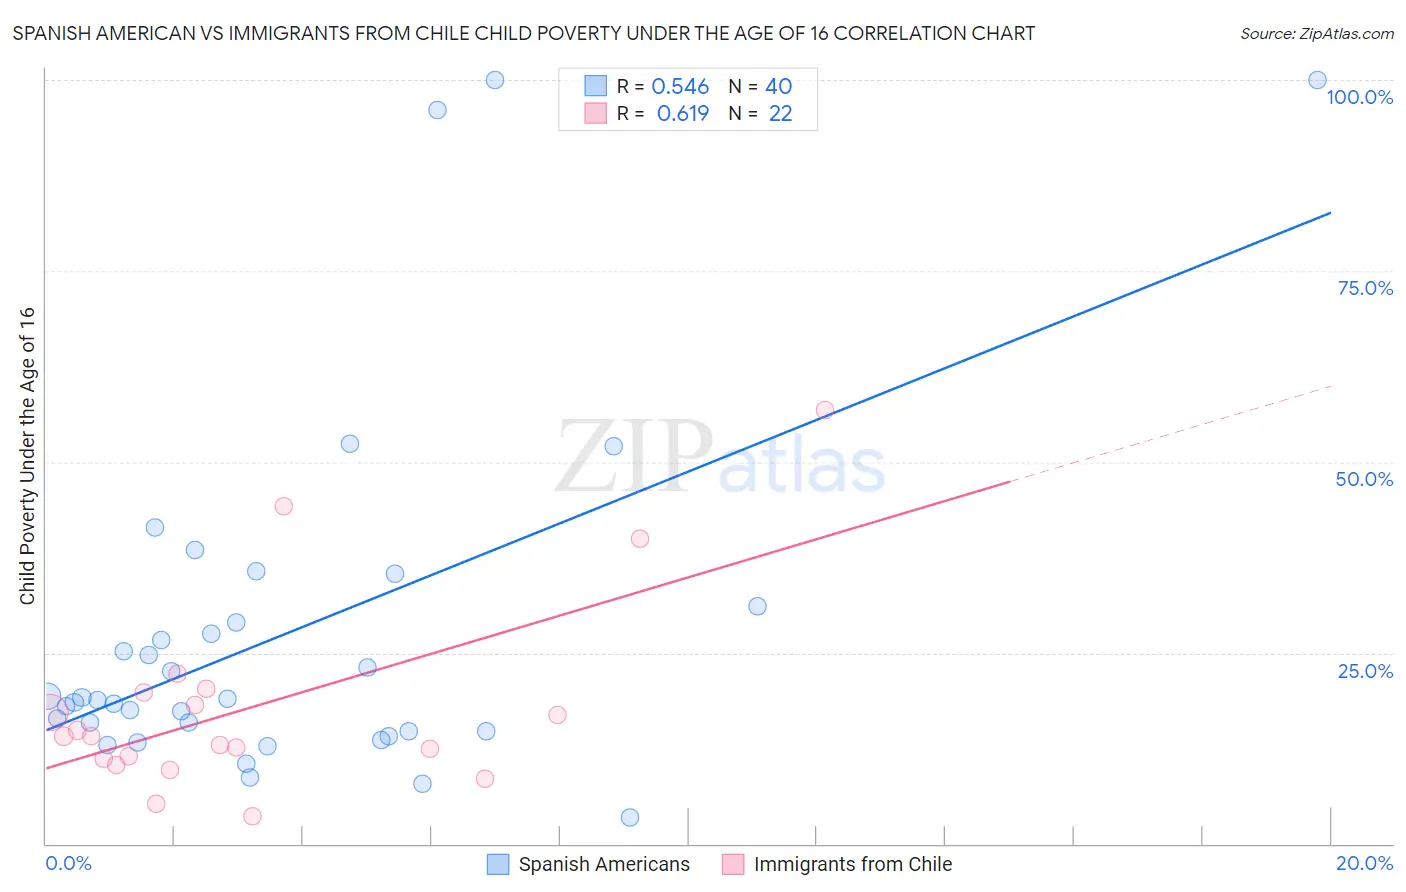 Spanish American vs Immigrants from Chile Child Poverty Under the Age of 16